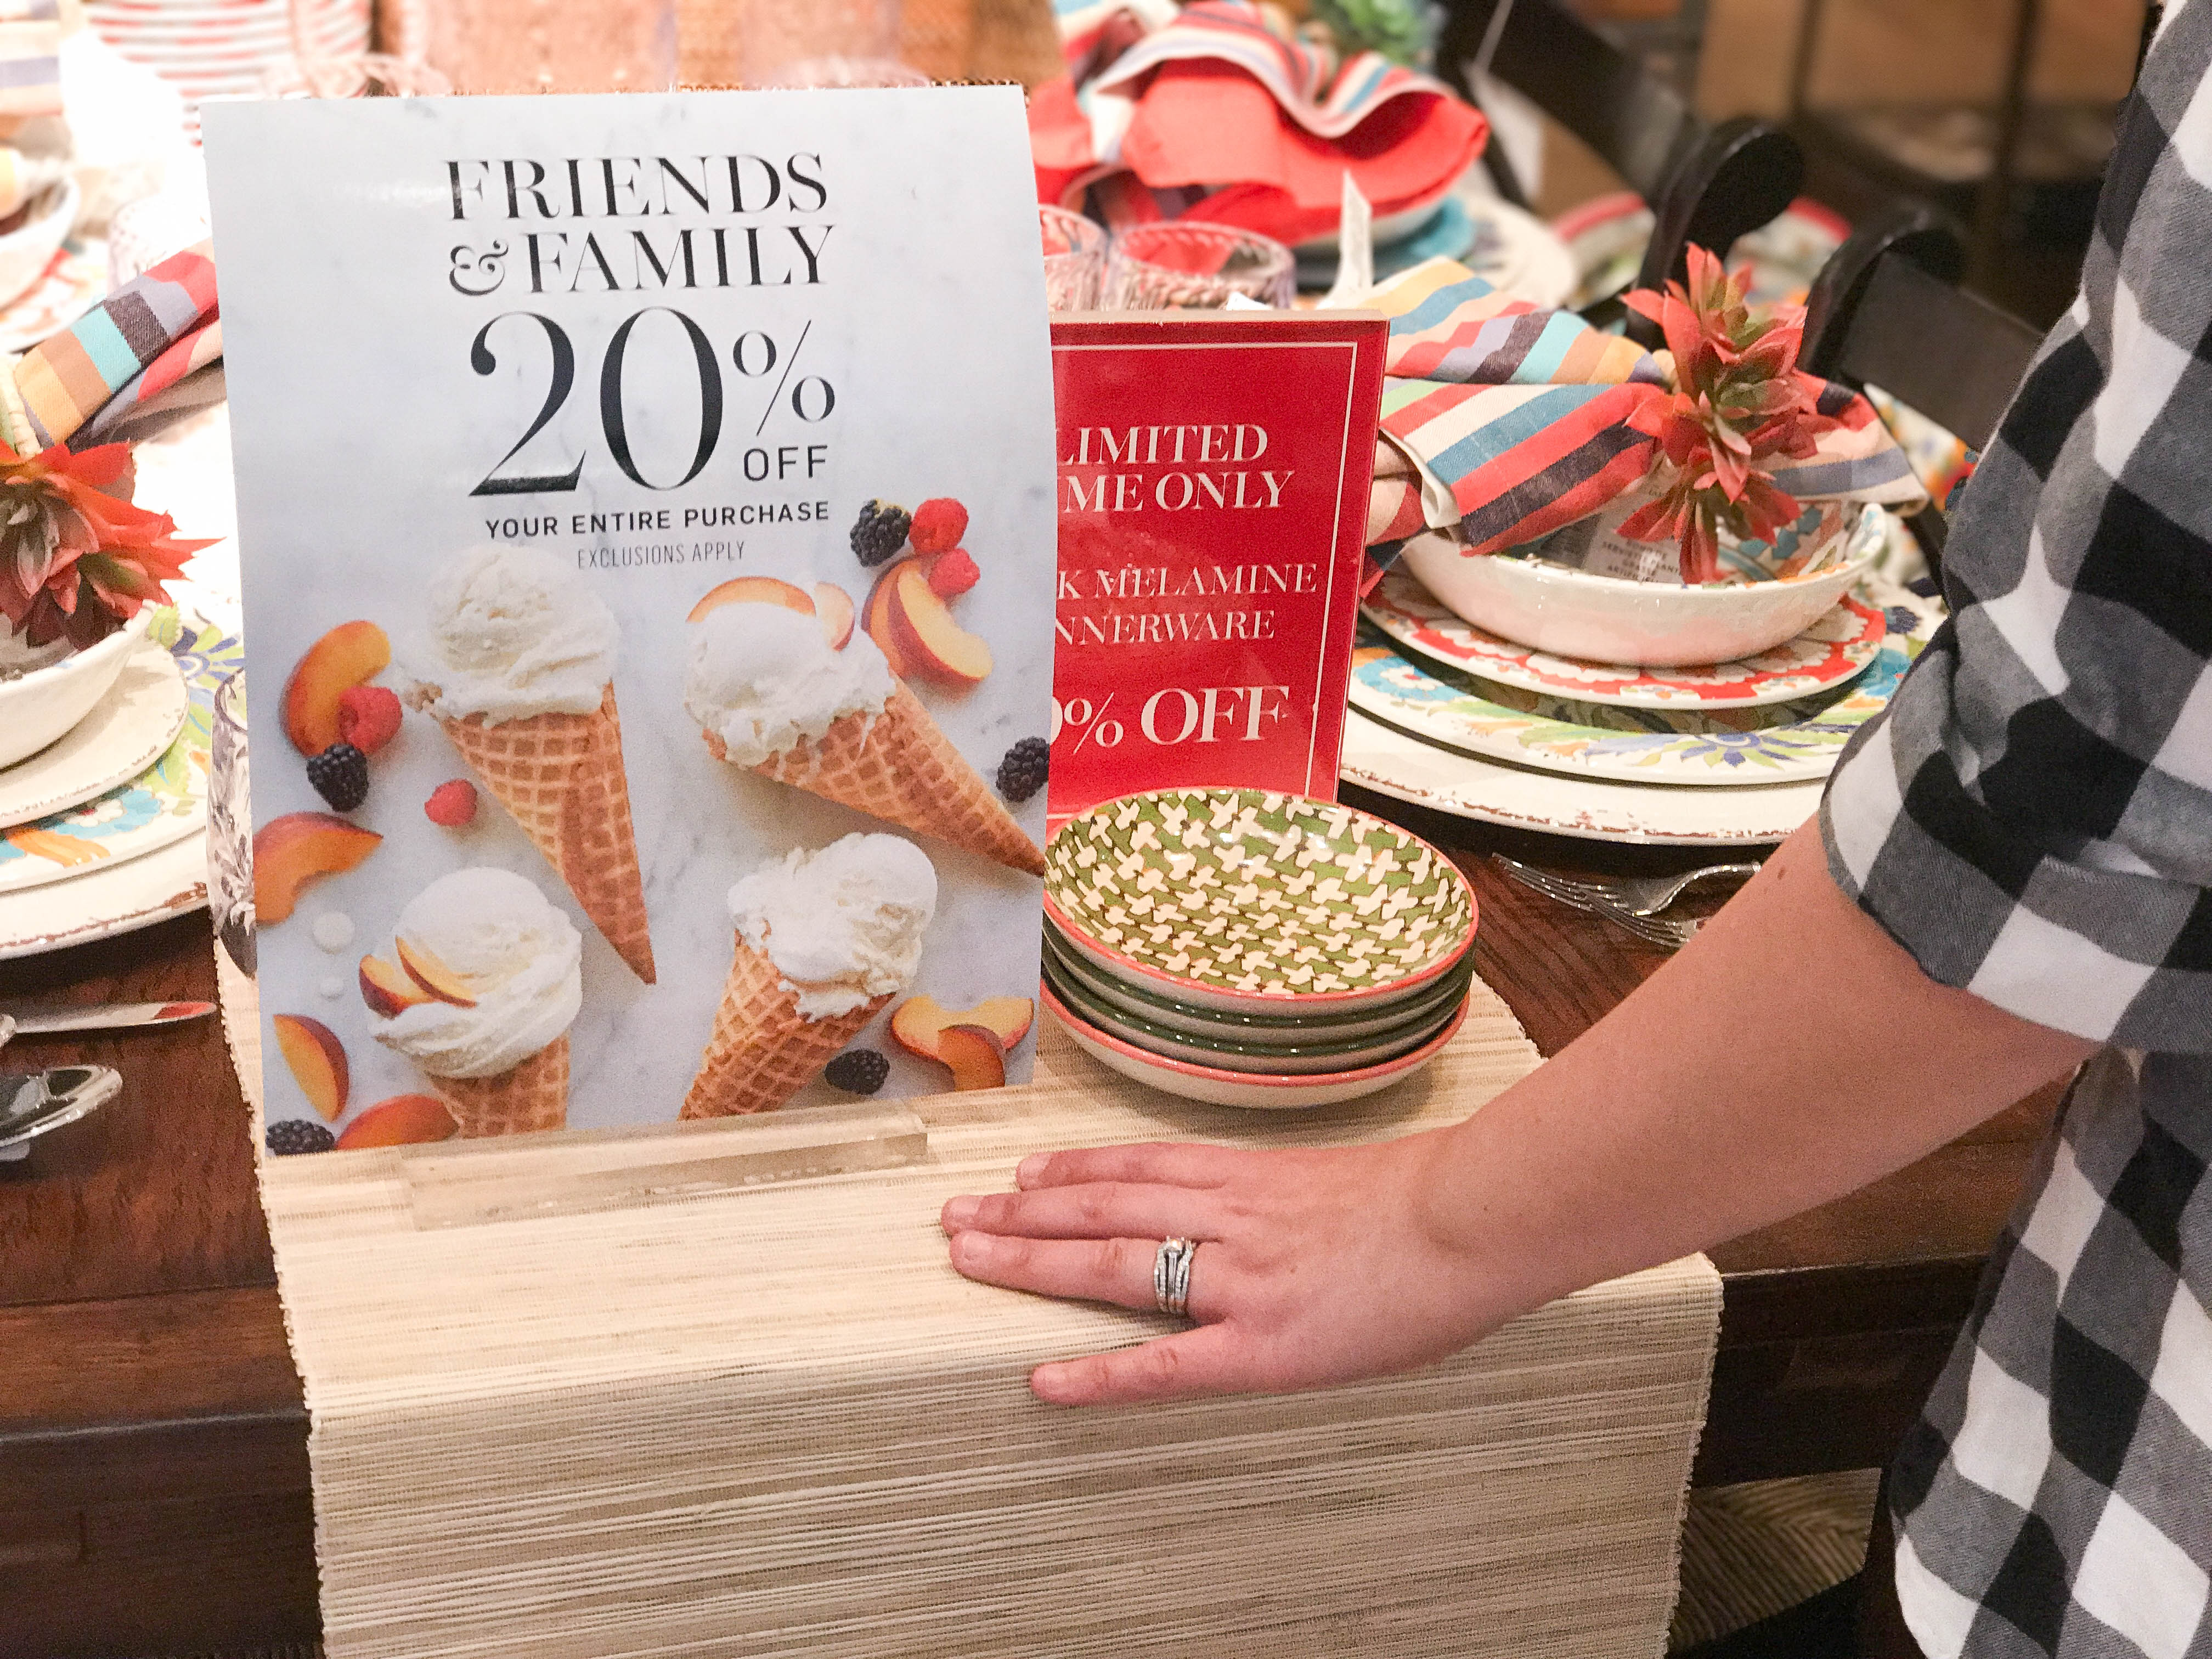 Respetuoso del medio ambiente Matemáticas candidato 10 Best Friends & Family Events Worth Shopping - The Krazy Coupon Lady